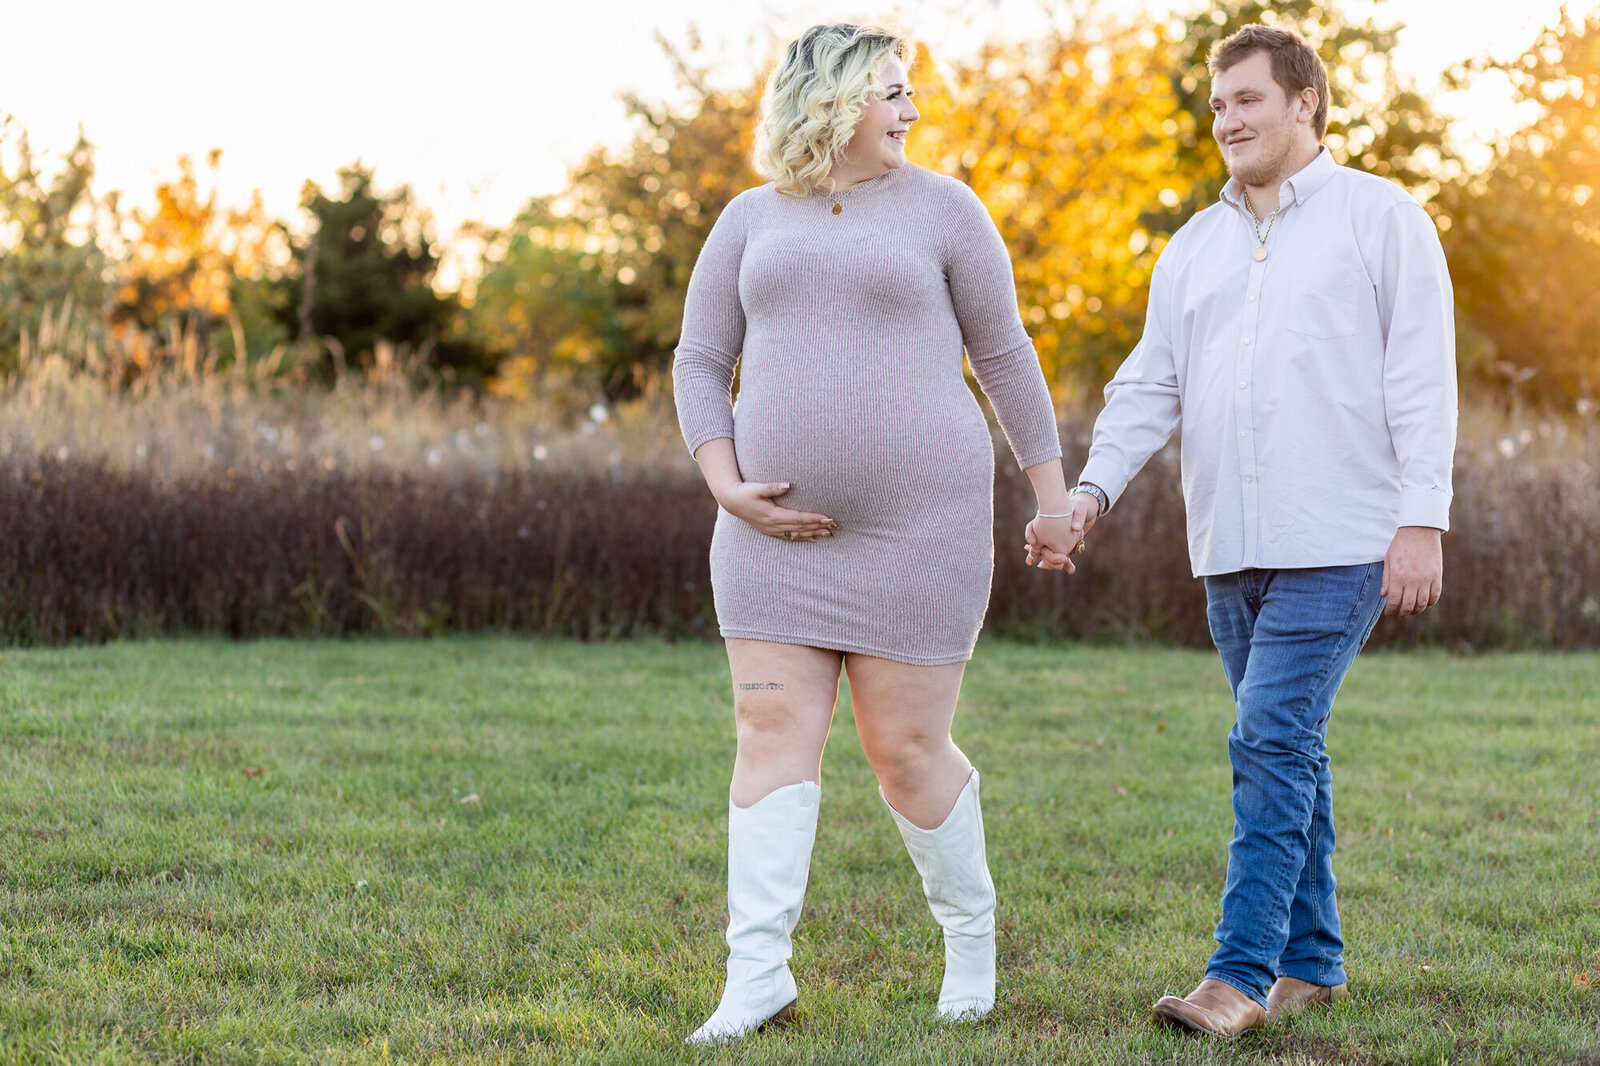 Maternity-outdoor-photography-session-golden-hour-Frankfort-Kentucky-photographer